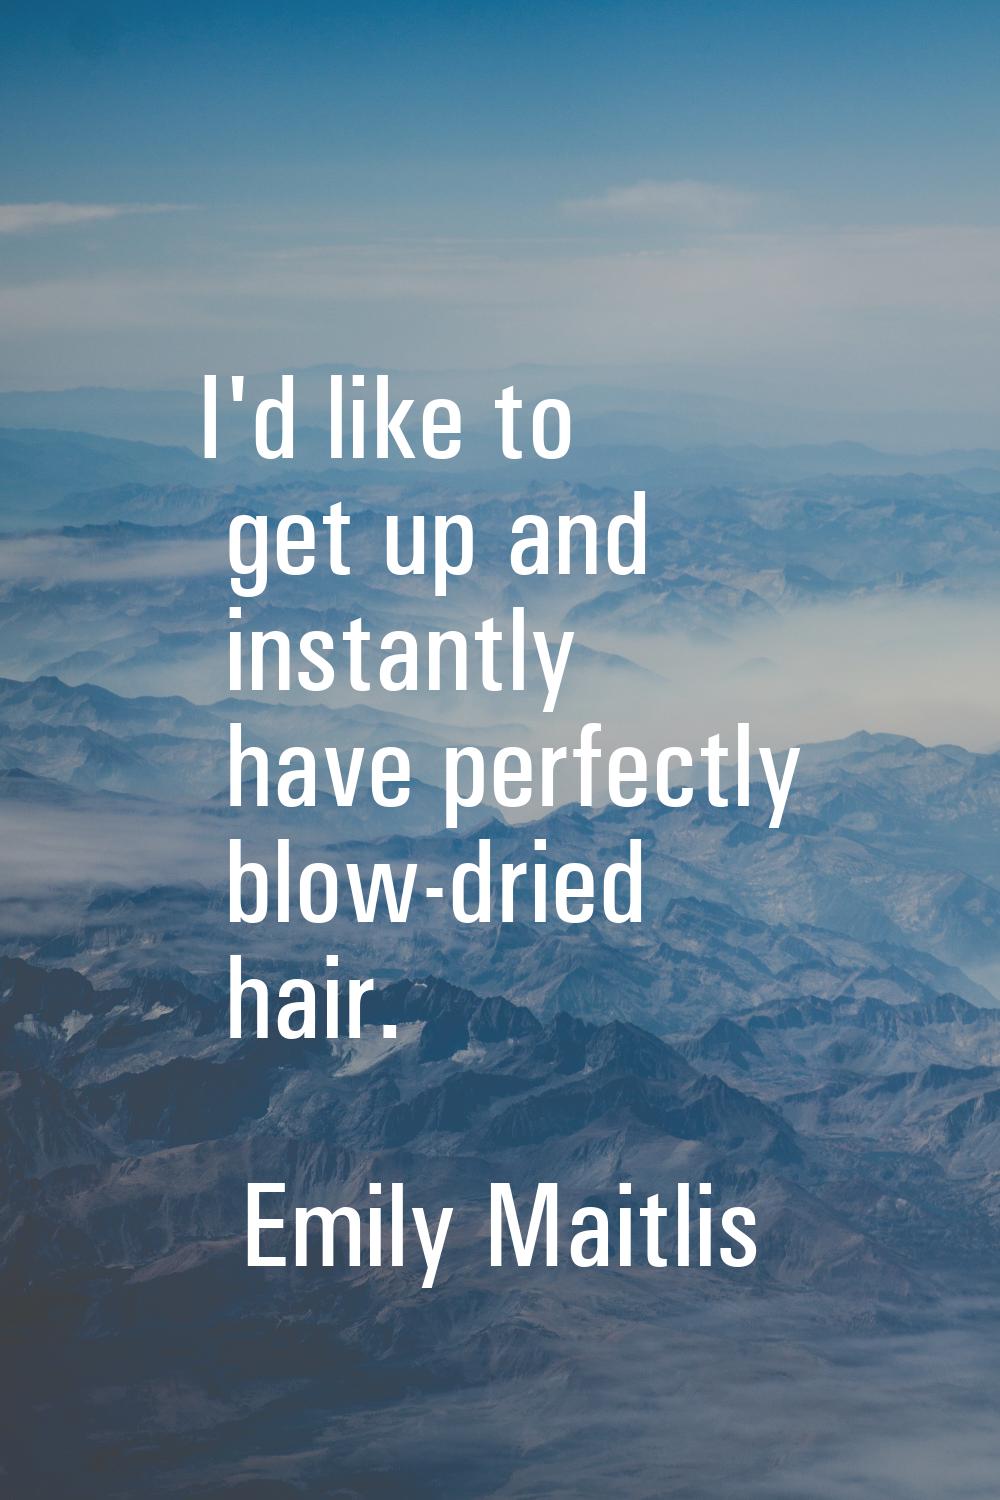 I'd like to get up and instantly have perfectly blow-dried hair.